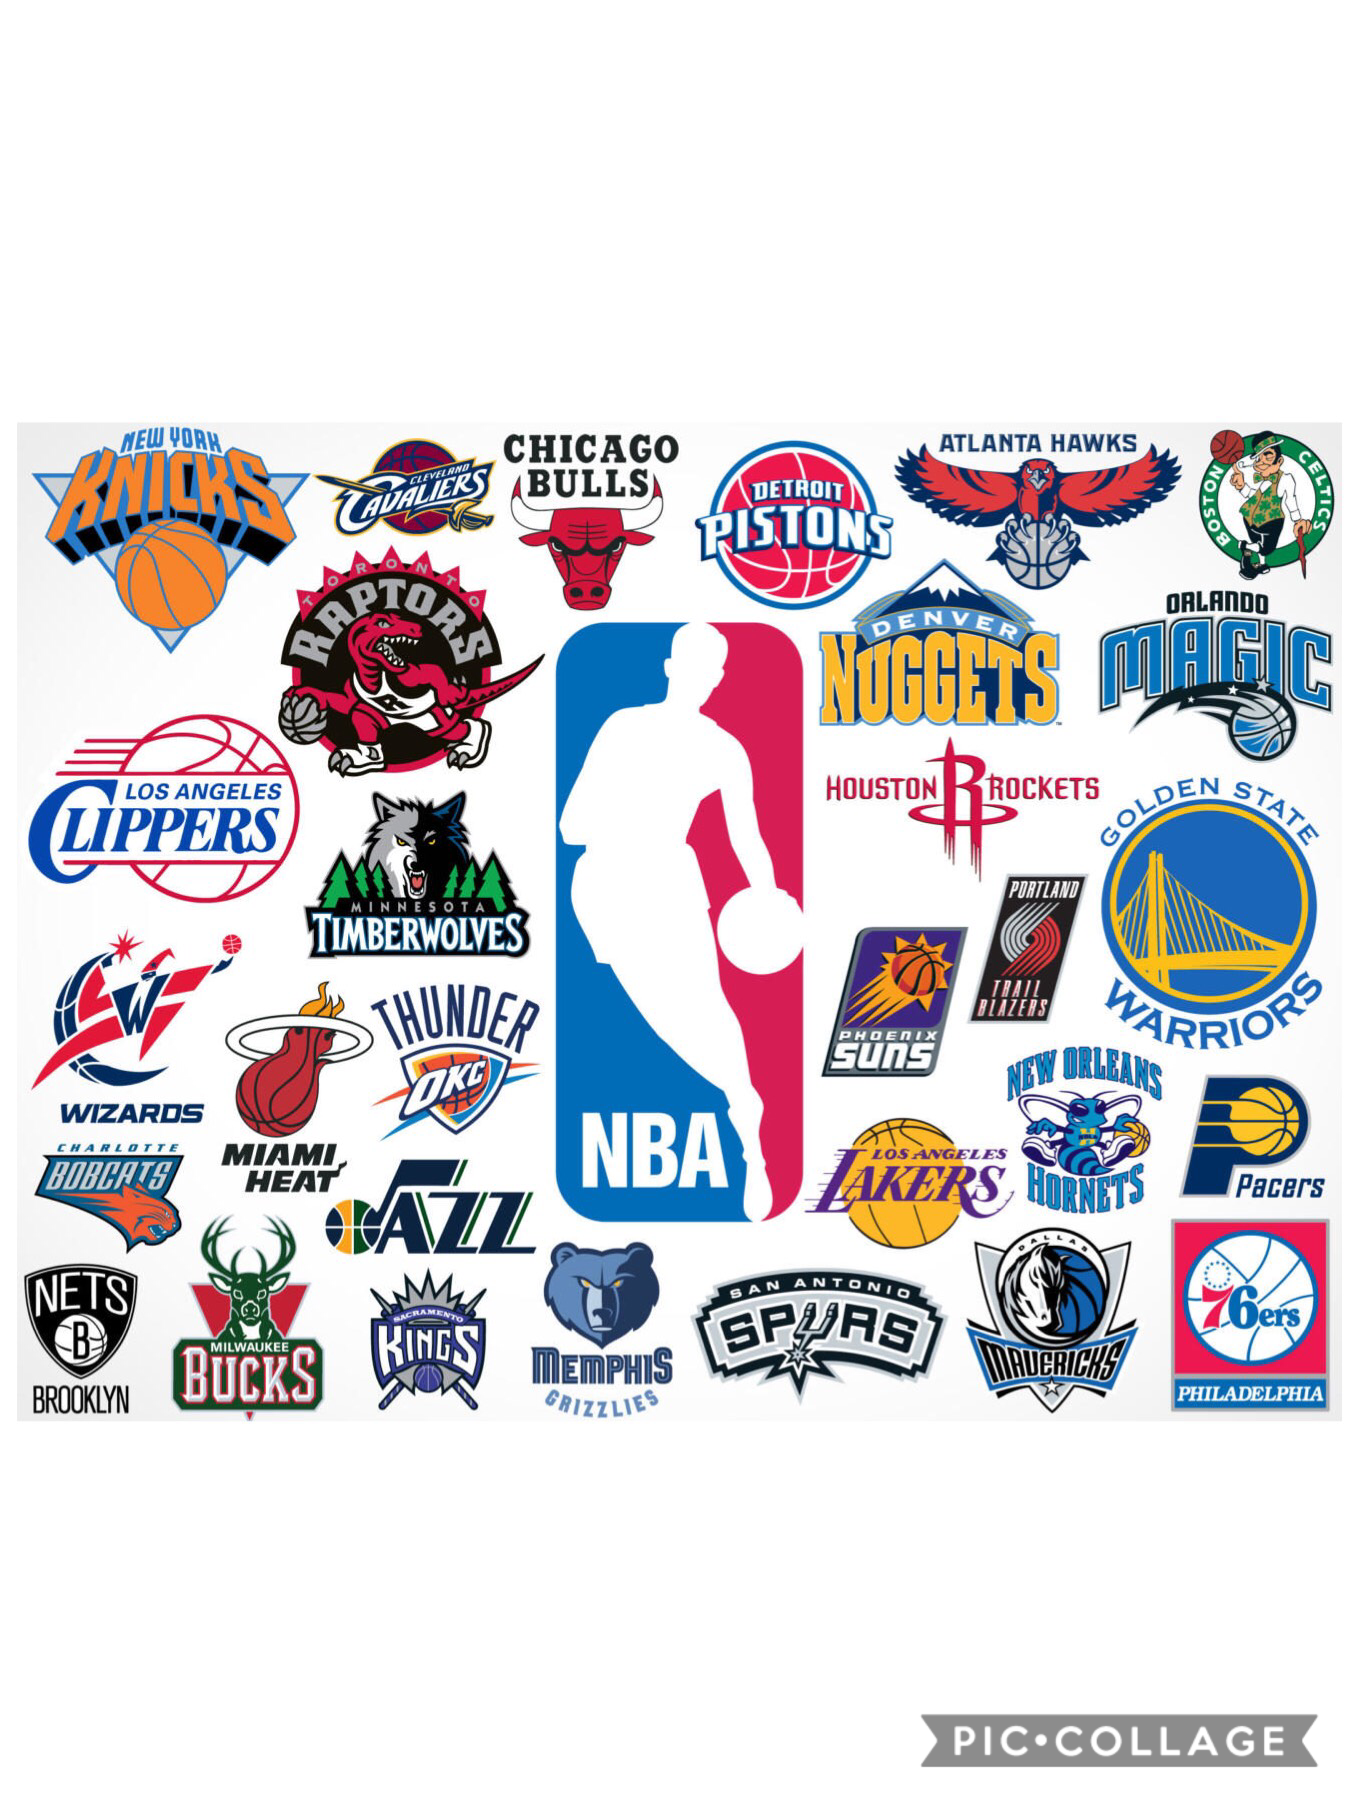 With the NBA season coming to a close who do you have taking the trophy?? I got the Bucks or the Nuggets.